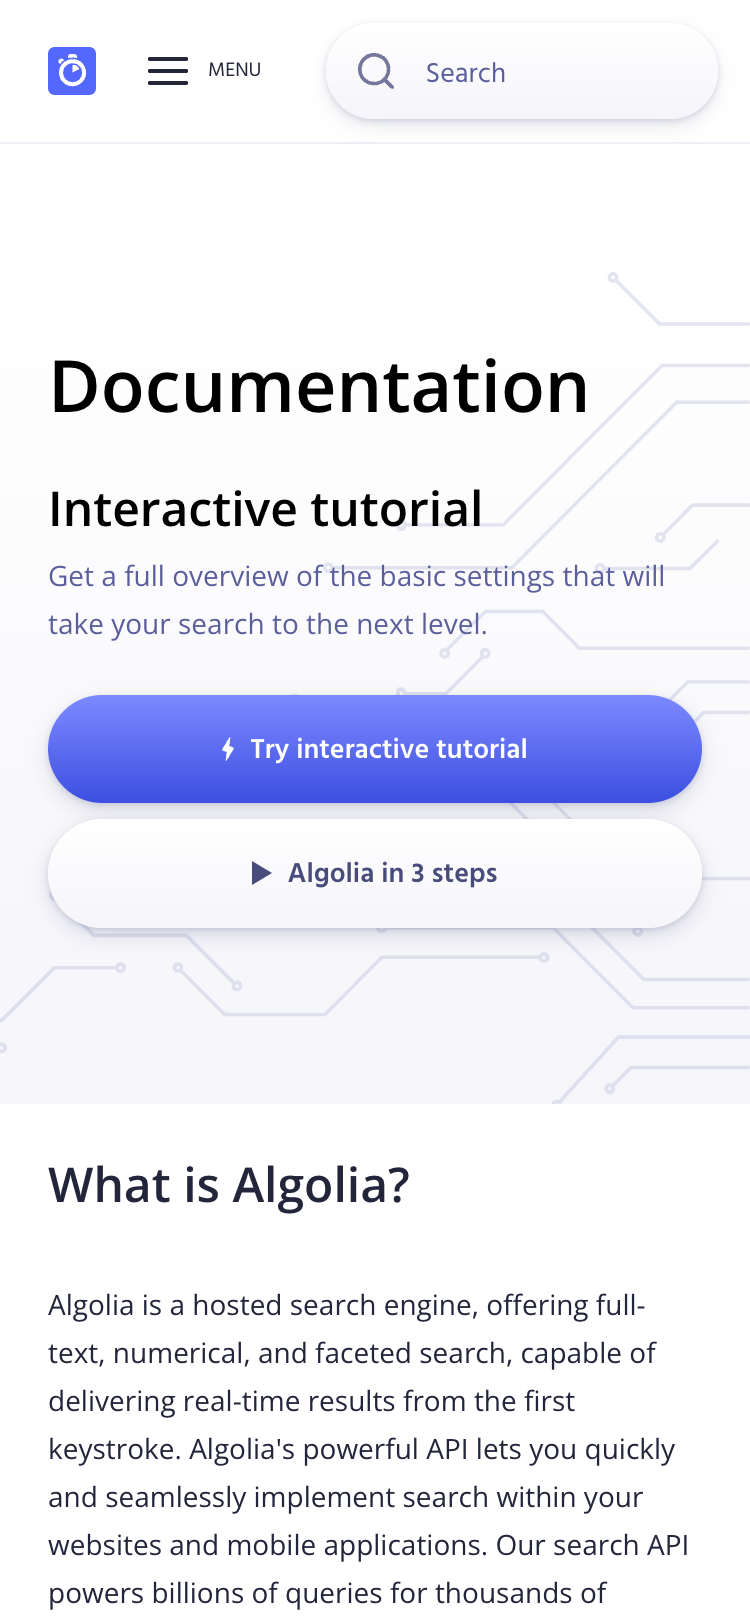 A mobile screenshot of the Algolia documentation home page. A header contains a 'menu' button and a 'search' button. Call-to-actions in the hero section invite the user to try an interactive tutorial or learn more about Algolia.